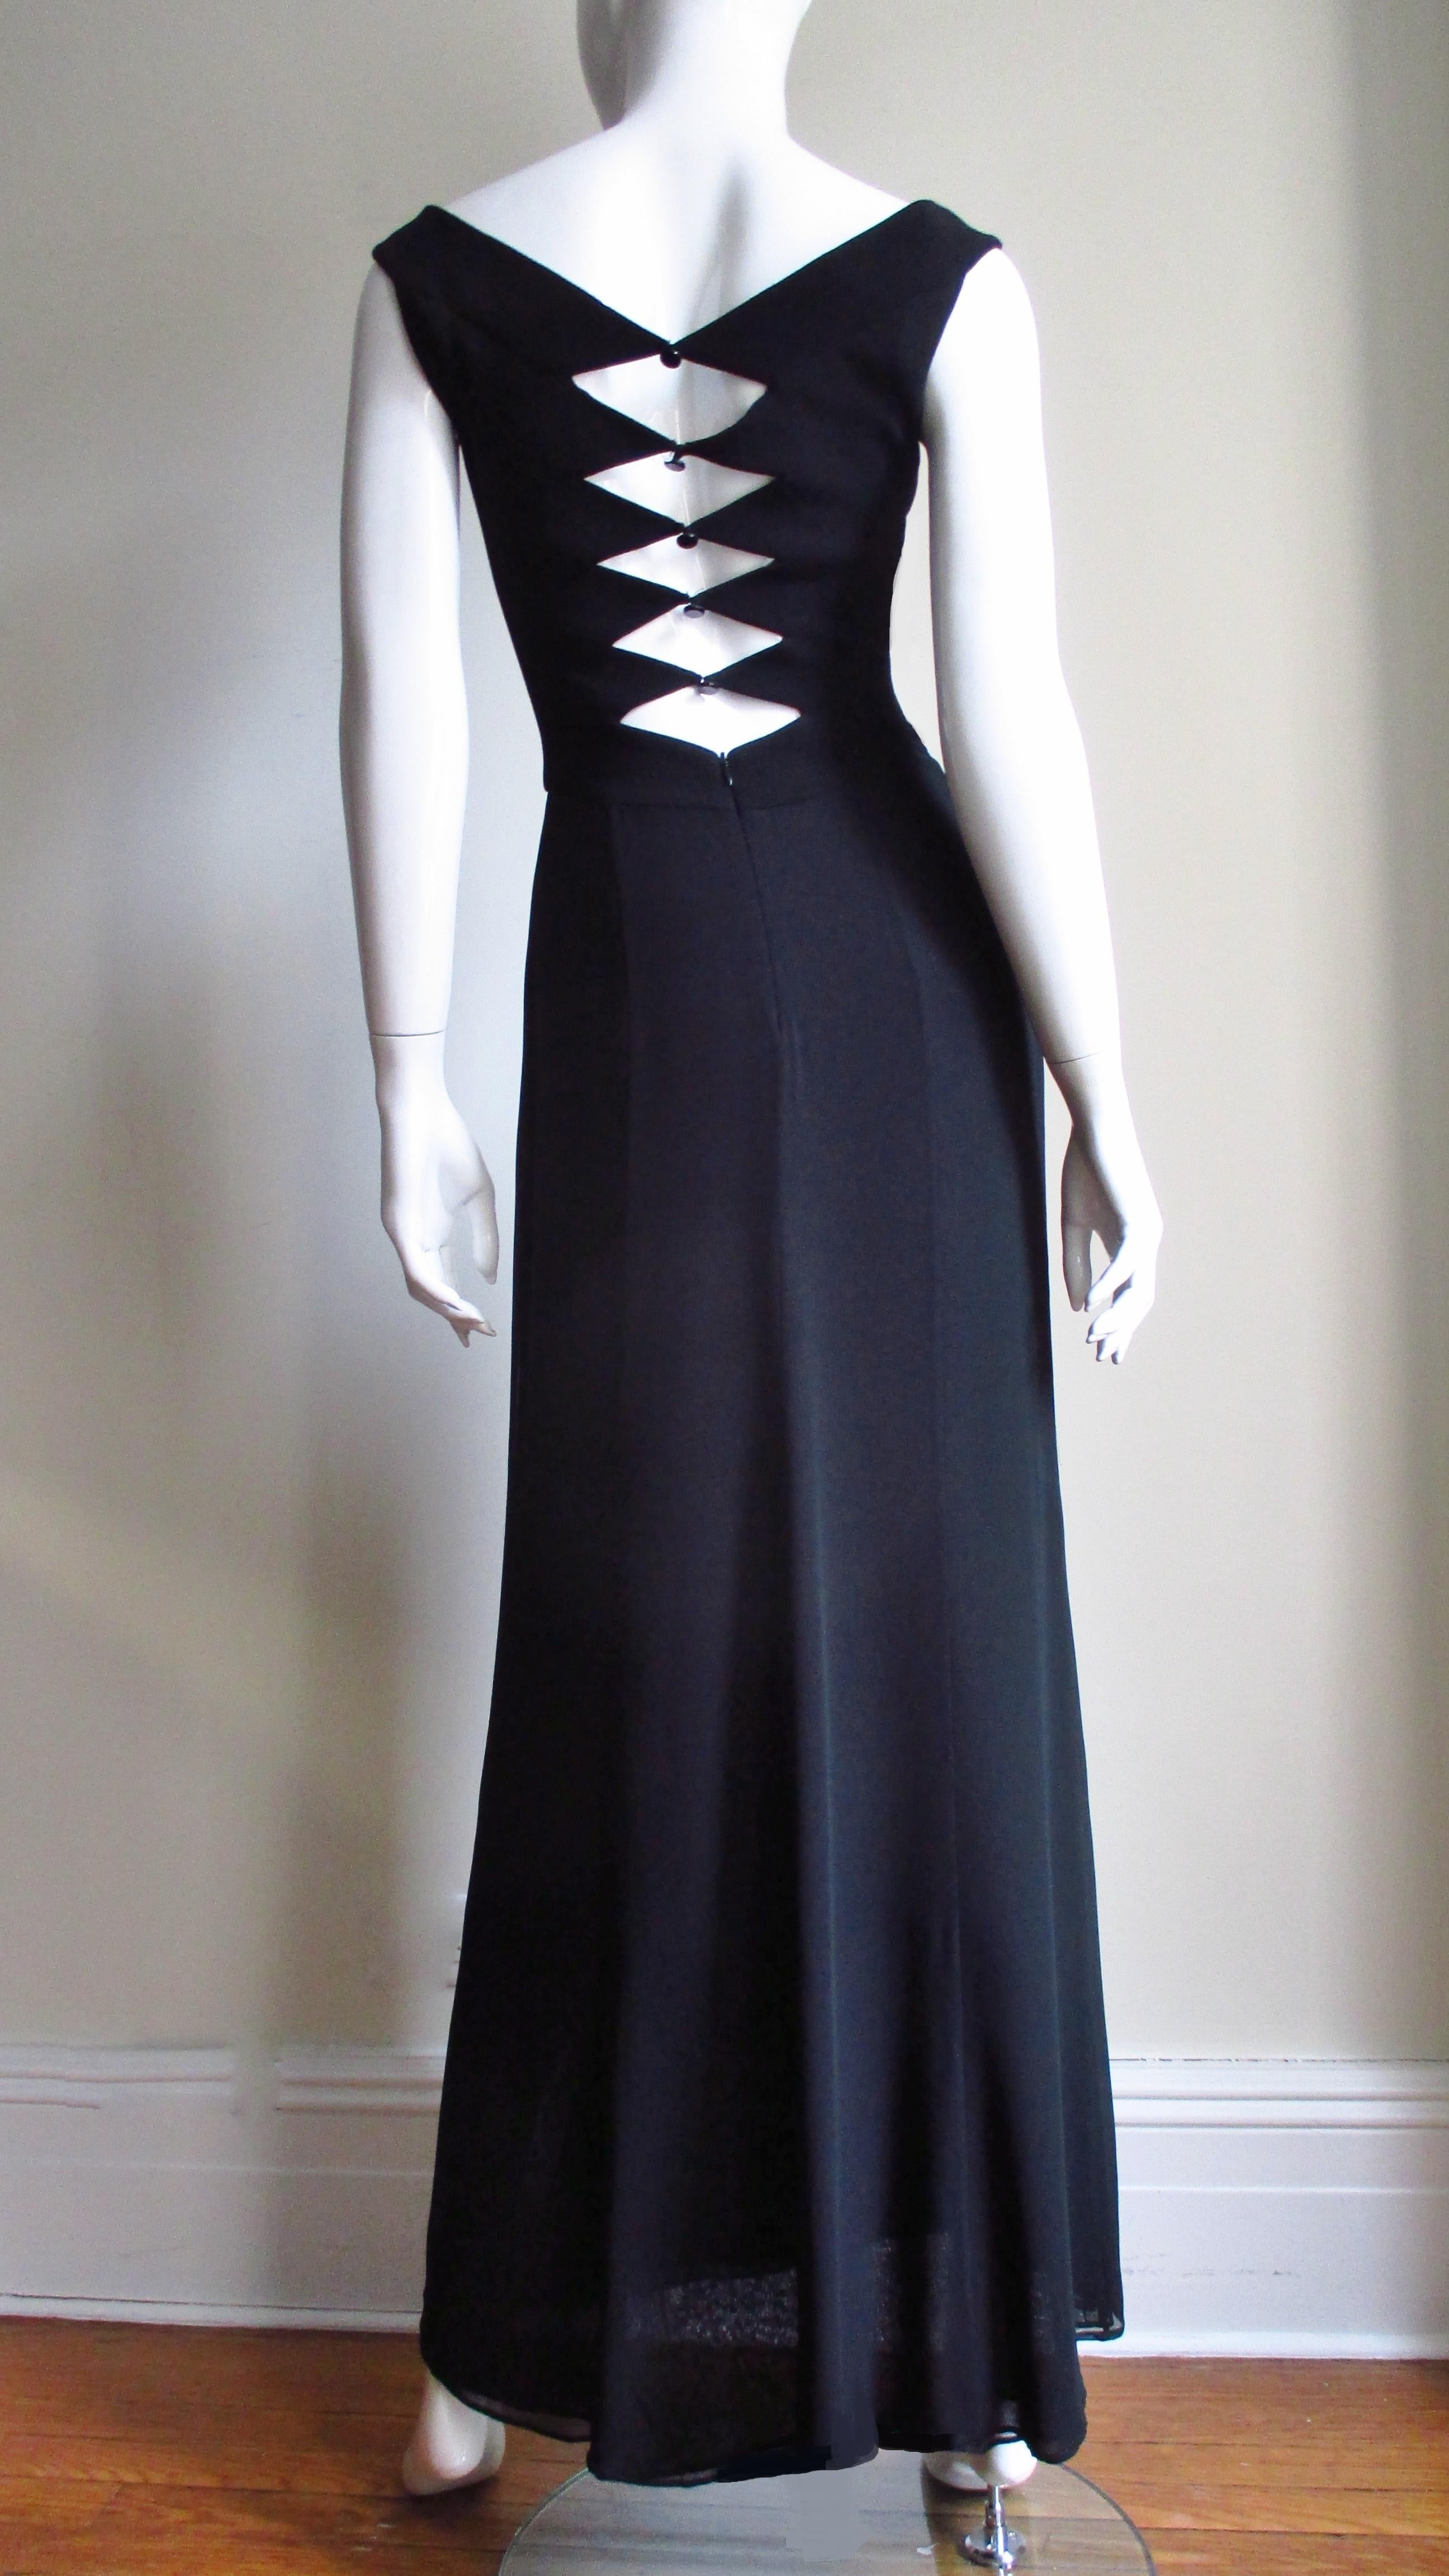 A gorgeous black silk and wool dress, gown by Herve Leger.  It is sleeveless, semi fitted with a square cut neckline and 3 layer silk skirt falling straight in front, flaring subtly in the back.  There is elaborate detail in the back of the bodice